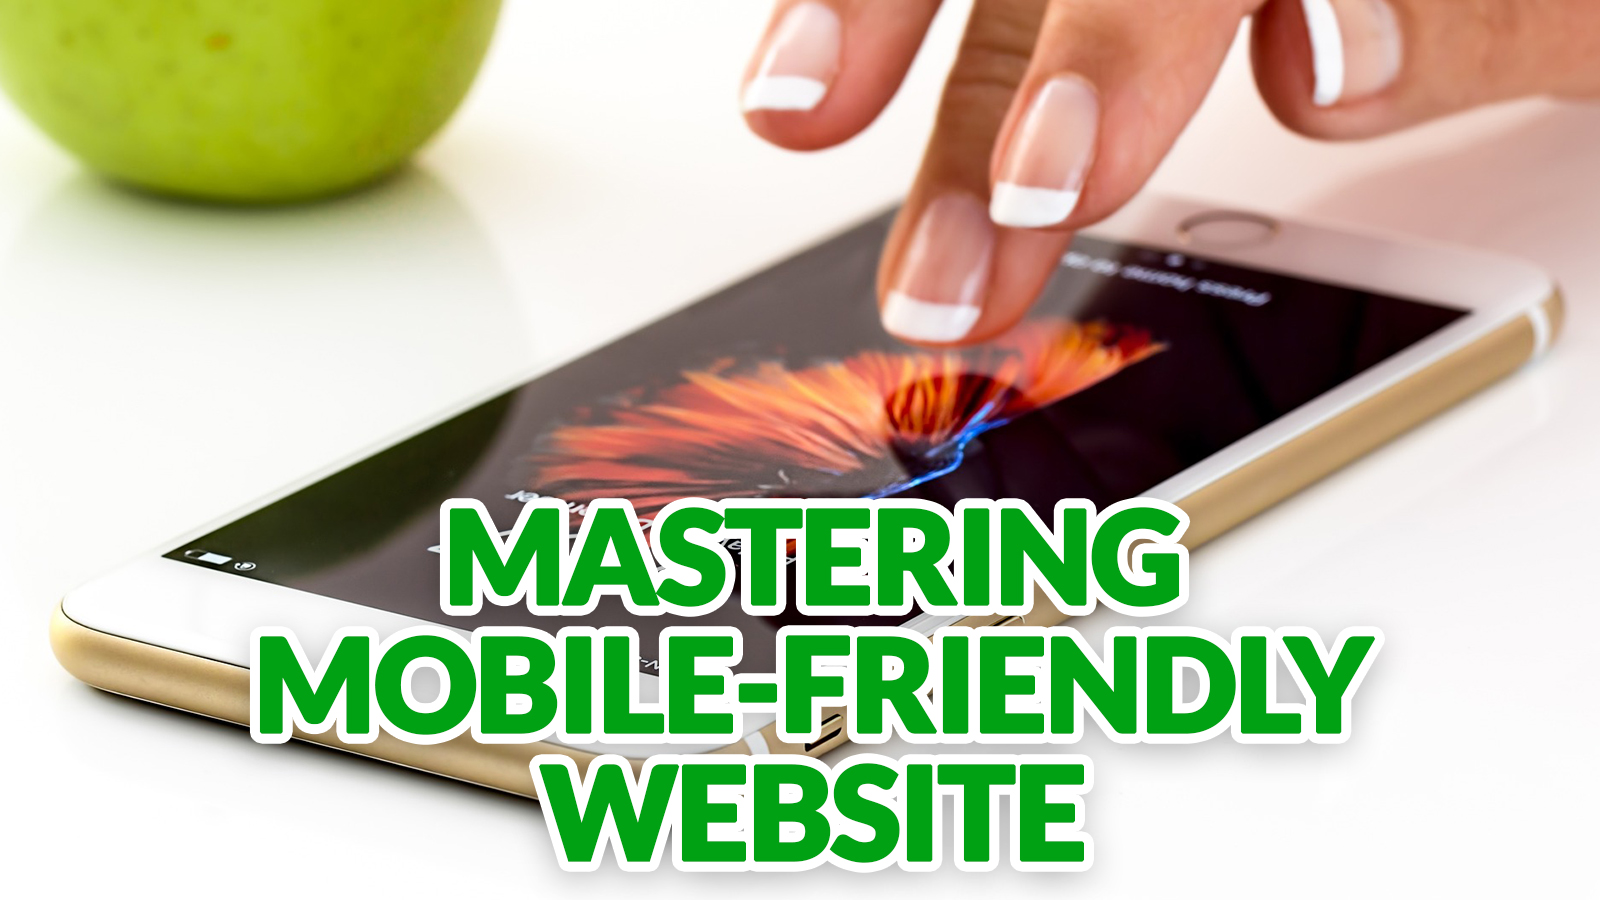 Mastering Mobile-Friendliness Responsive Design Mobile Search Optimization, and AMP